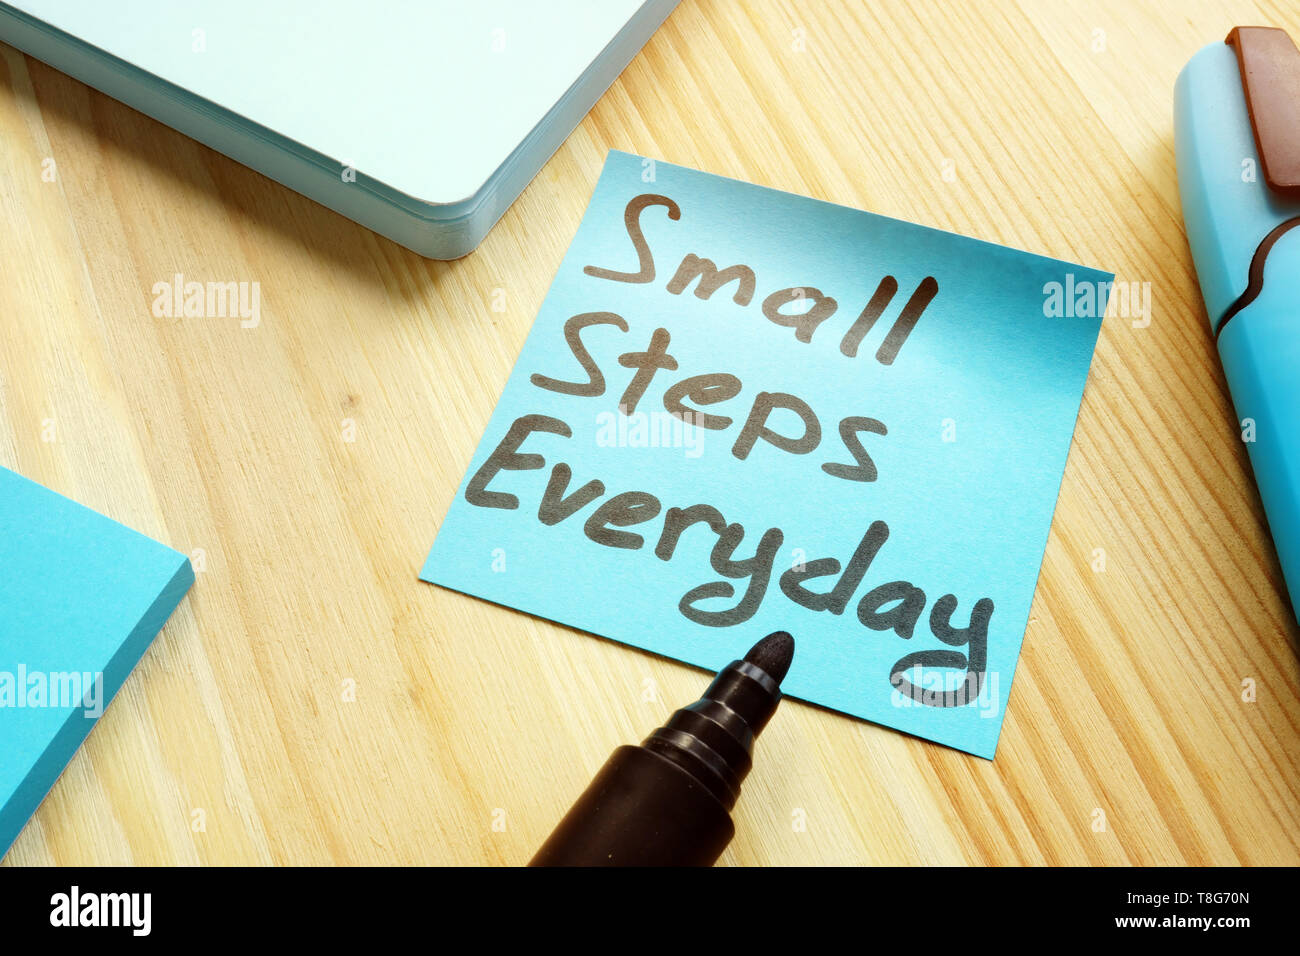 Handwritten quote Small steps everyday on table. Motivation concept. Stock Photo